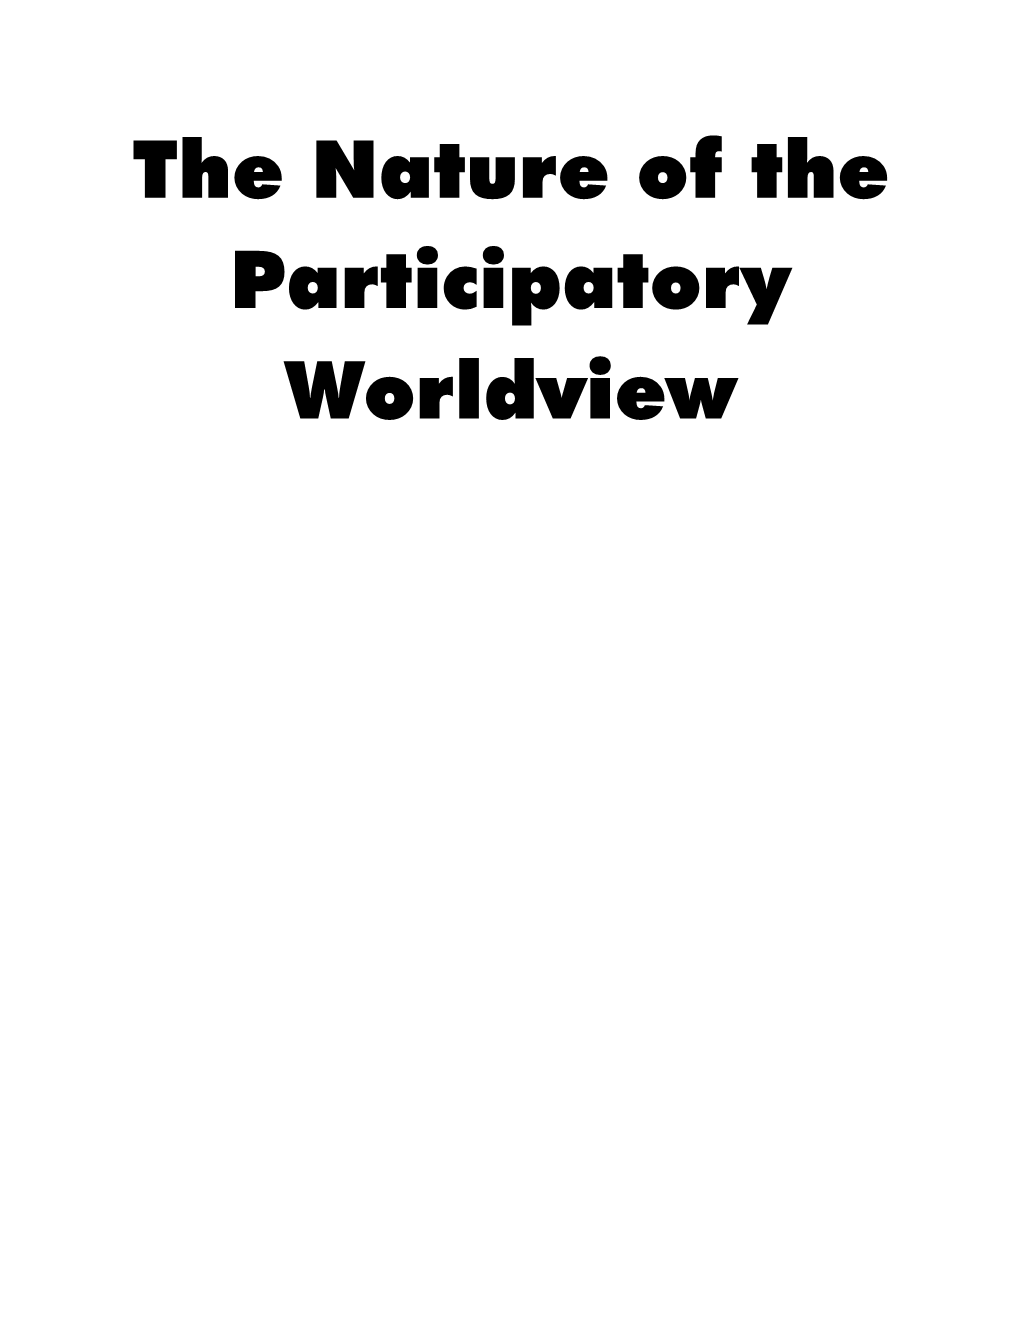 The Nature of the Participatory Worldview Chapter 1 – the Nature of the Participatory Worldview